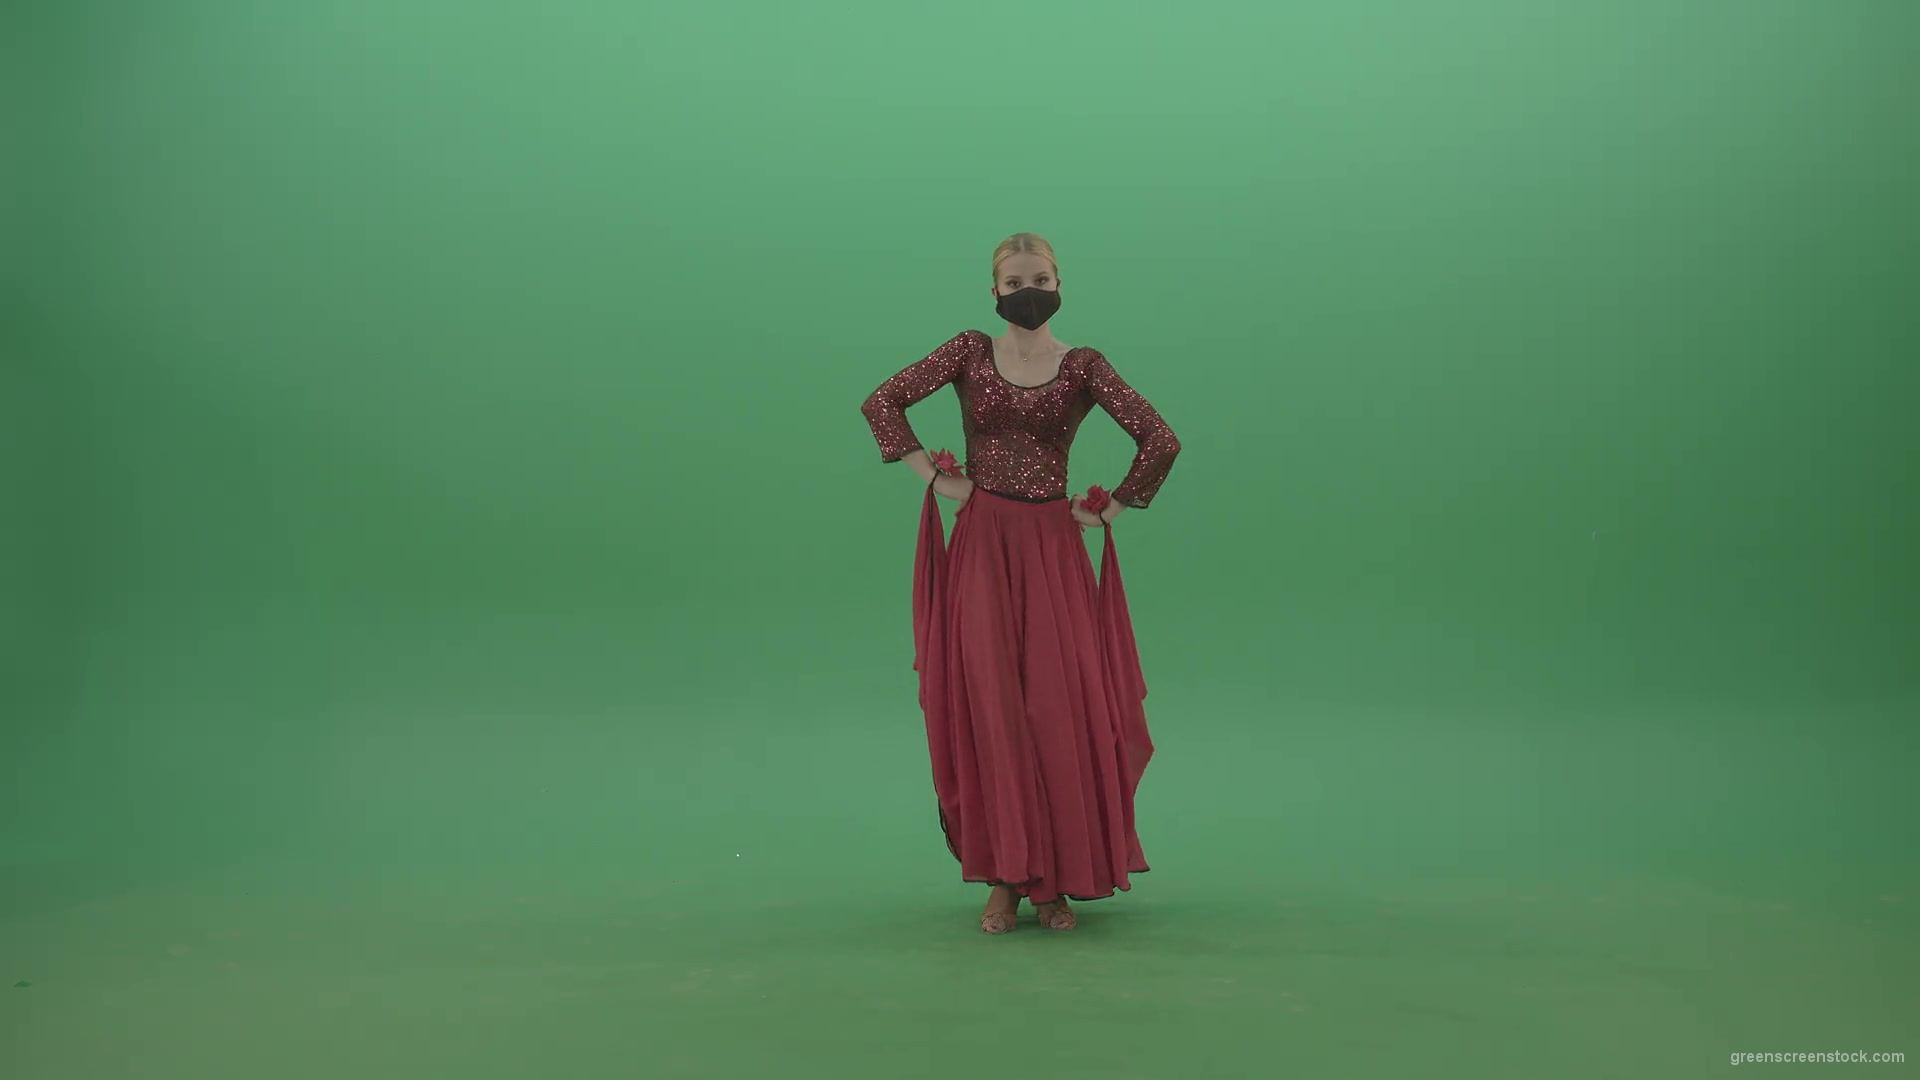 Beauty-Girl-with-black-mask-in-red-rumba-dress-waving-arms-isolated-on-green-screen-4K-Video-Footage-1920_002 Green Screen Stock